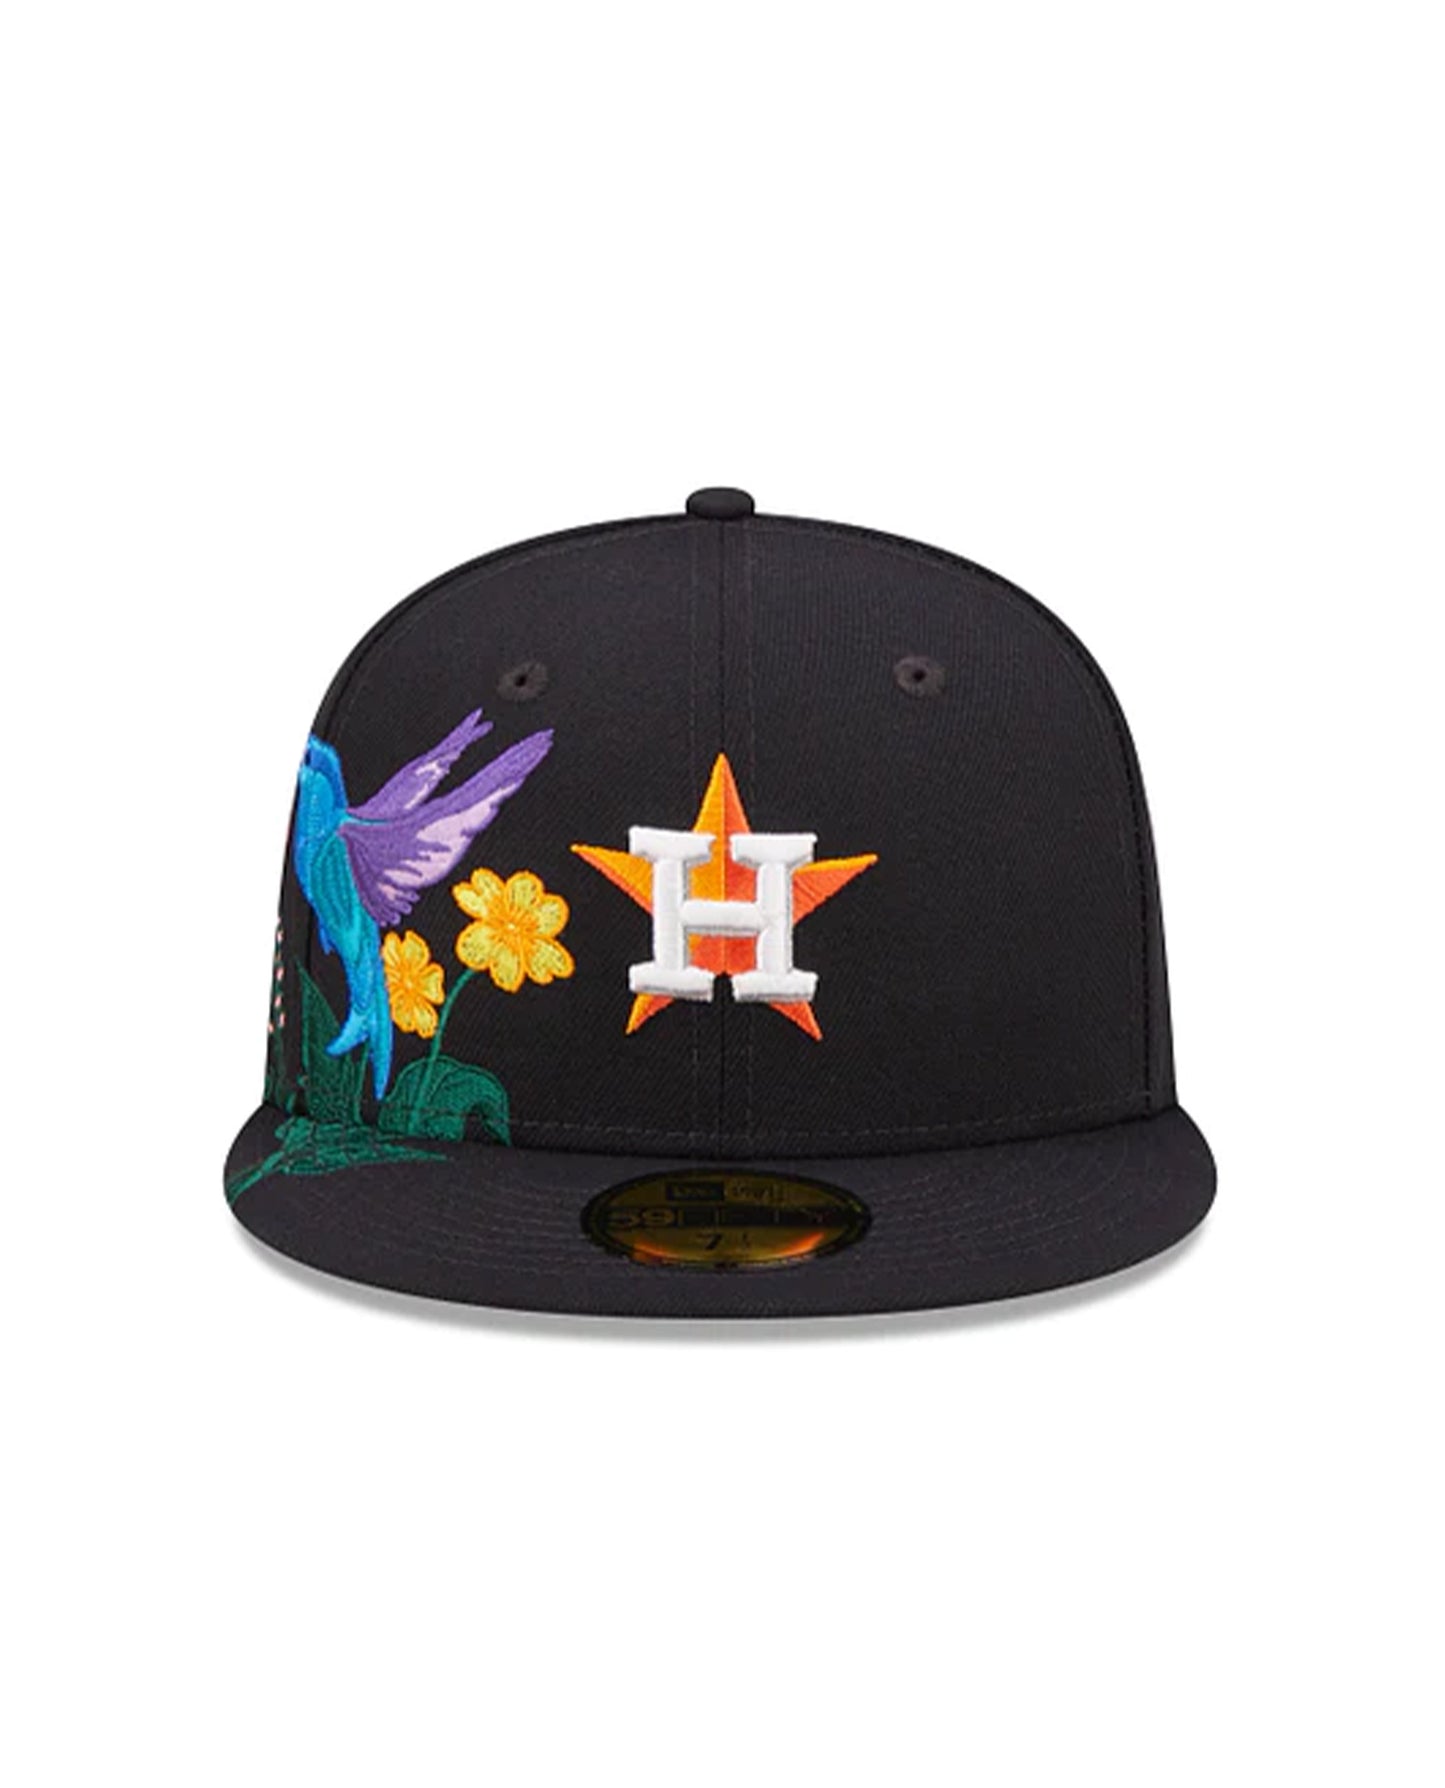 New Blooming Houston Astros Hat | STASHED